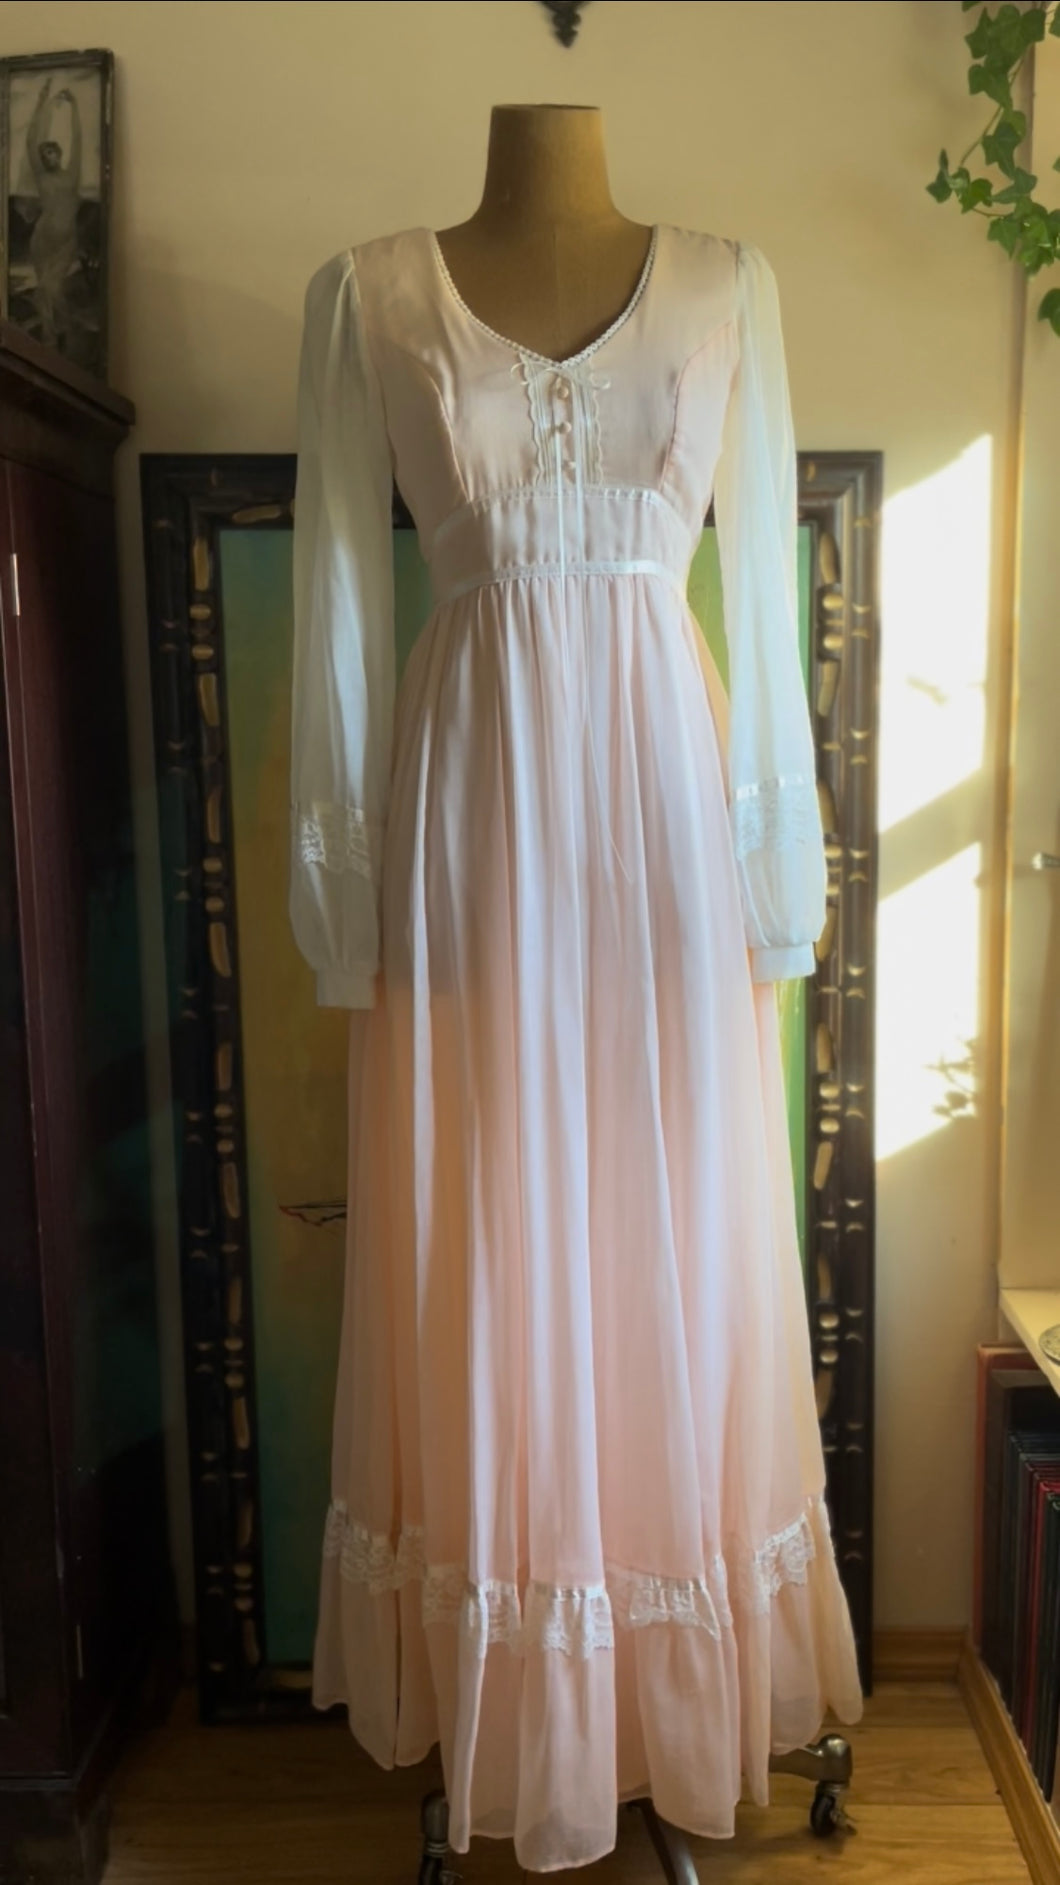 Sweetest 1970’s Vintage Palest Pink and White Gunne Sax Dress